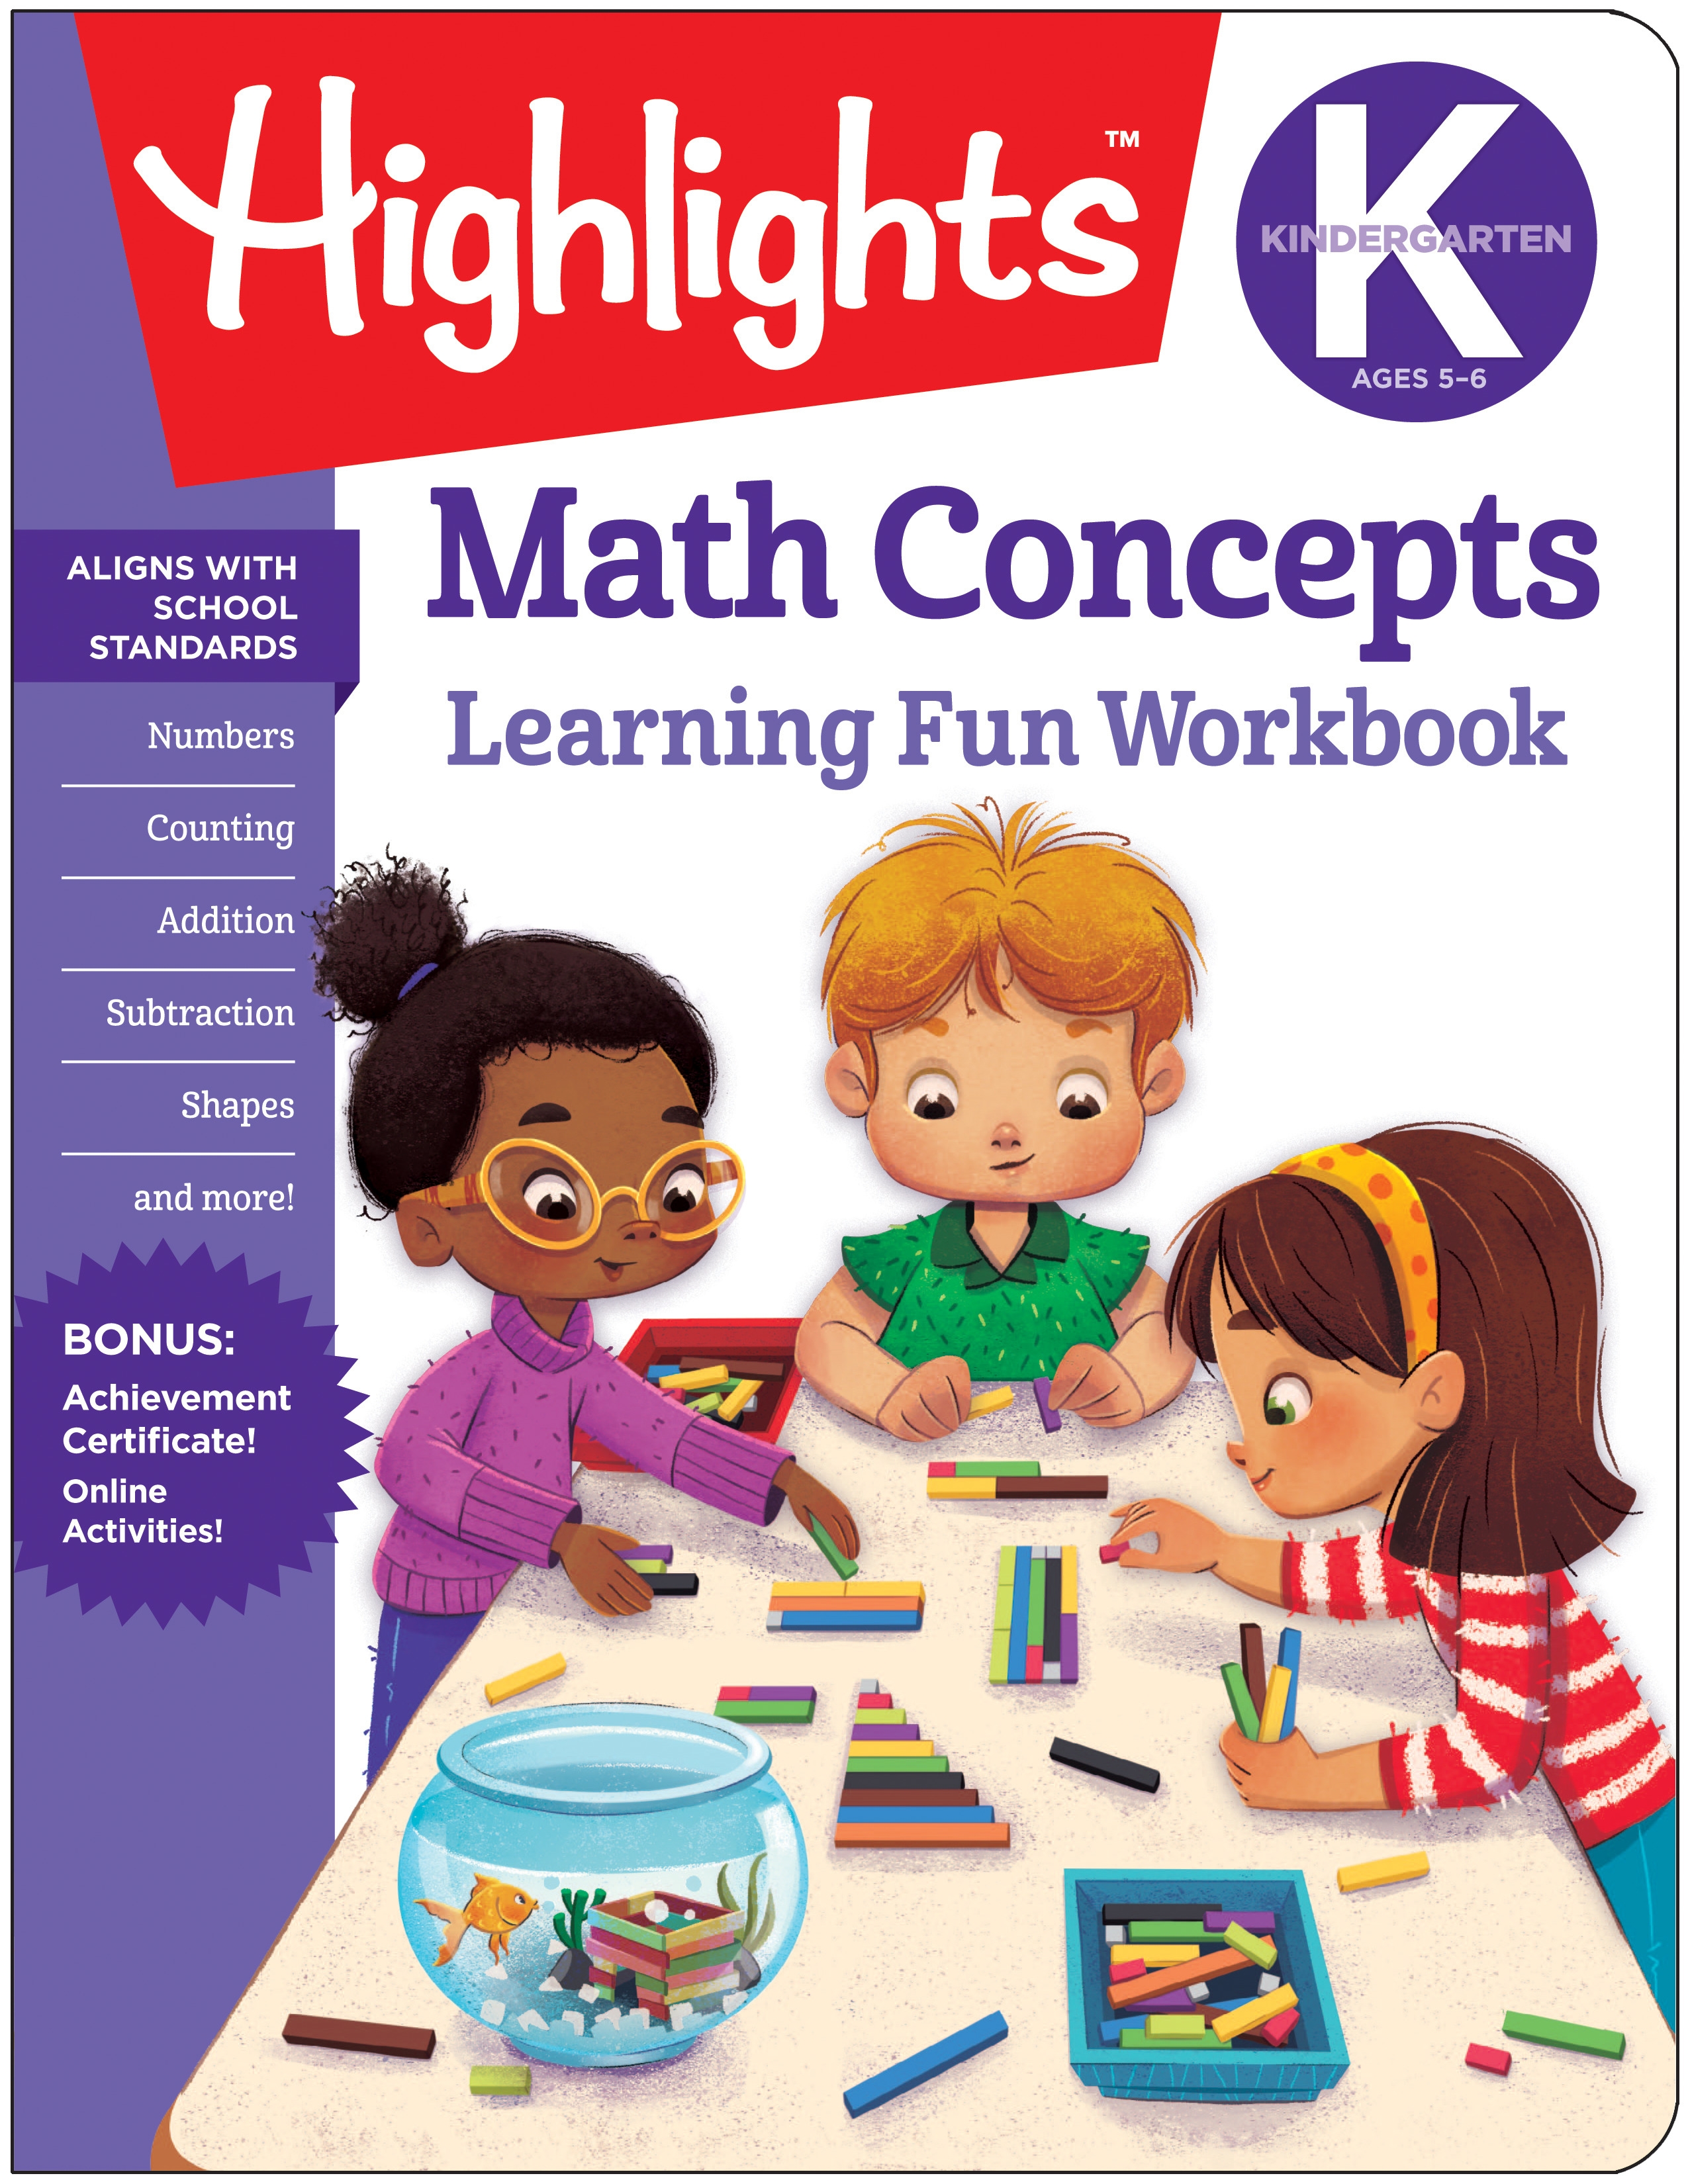 math-concepts-by-highlights-penguin-books-new-zealand